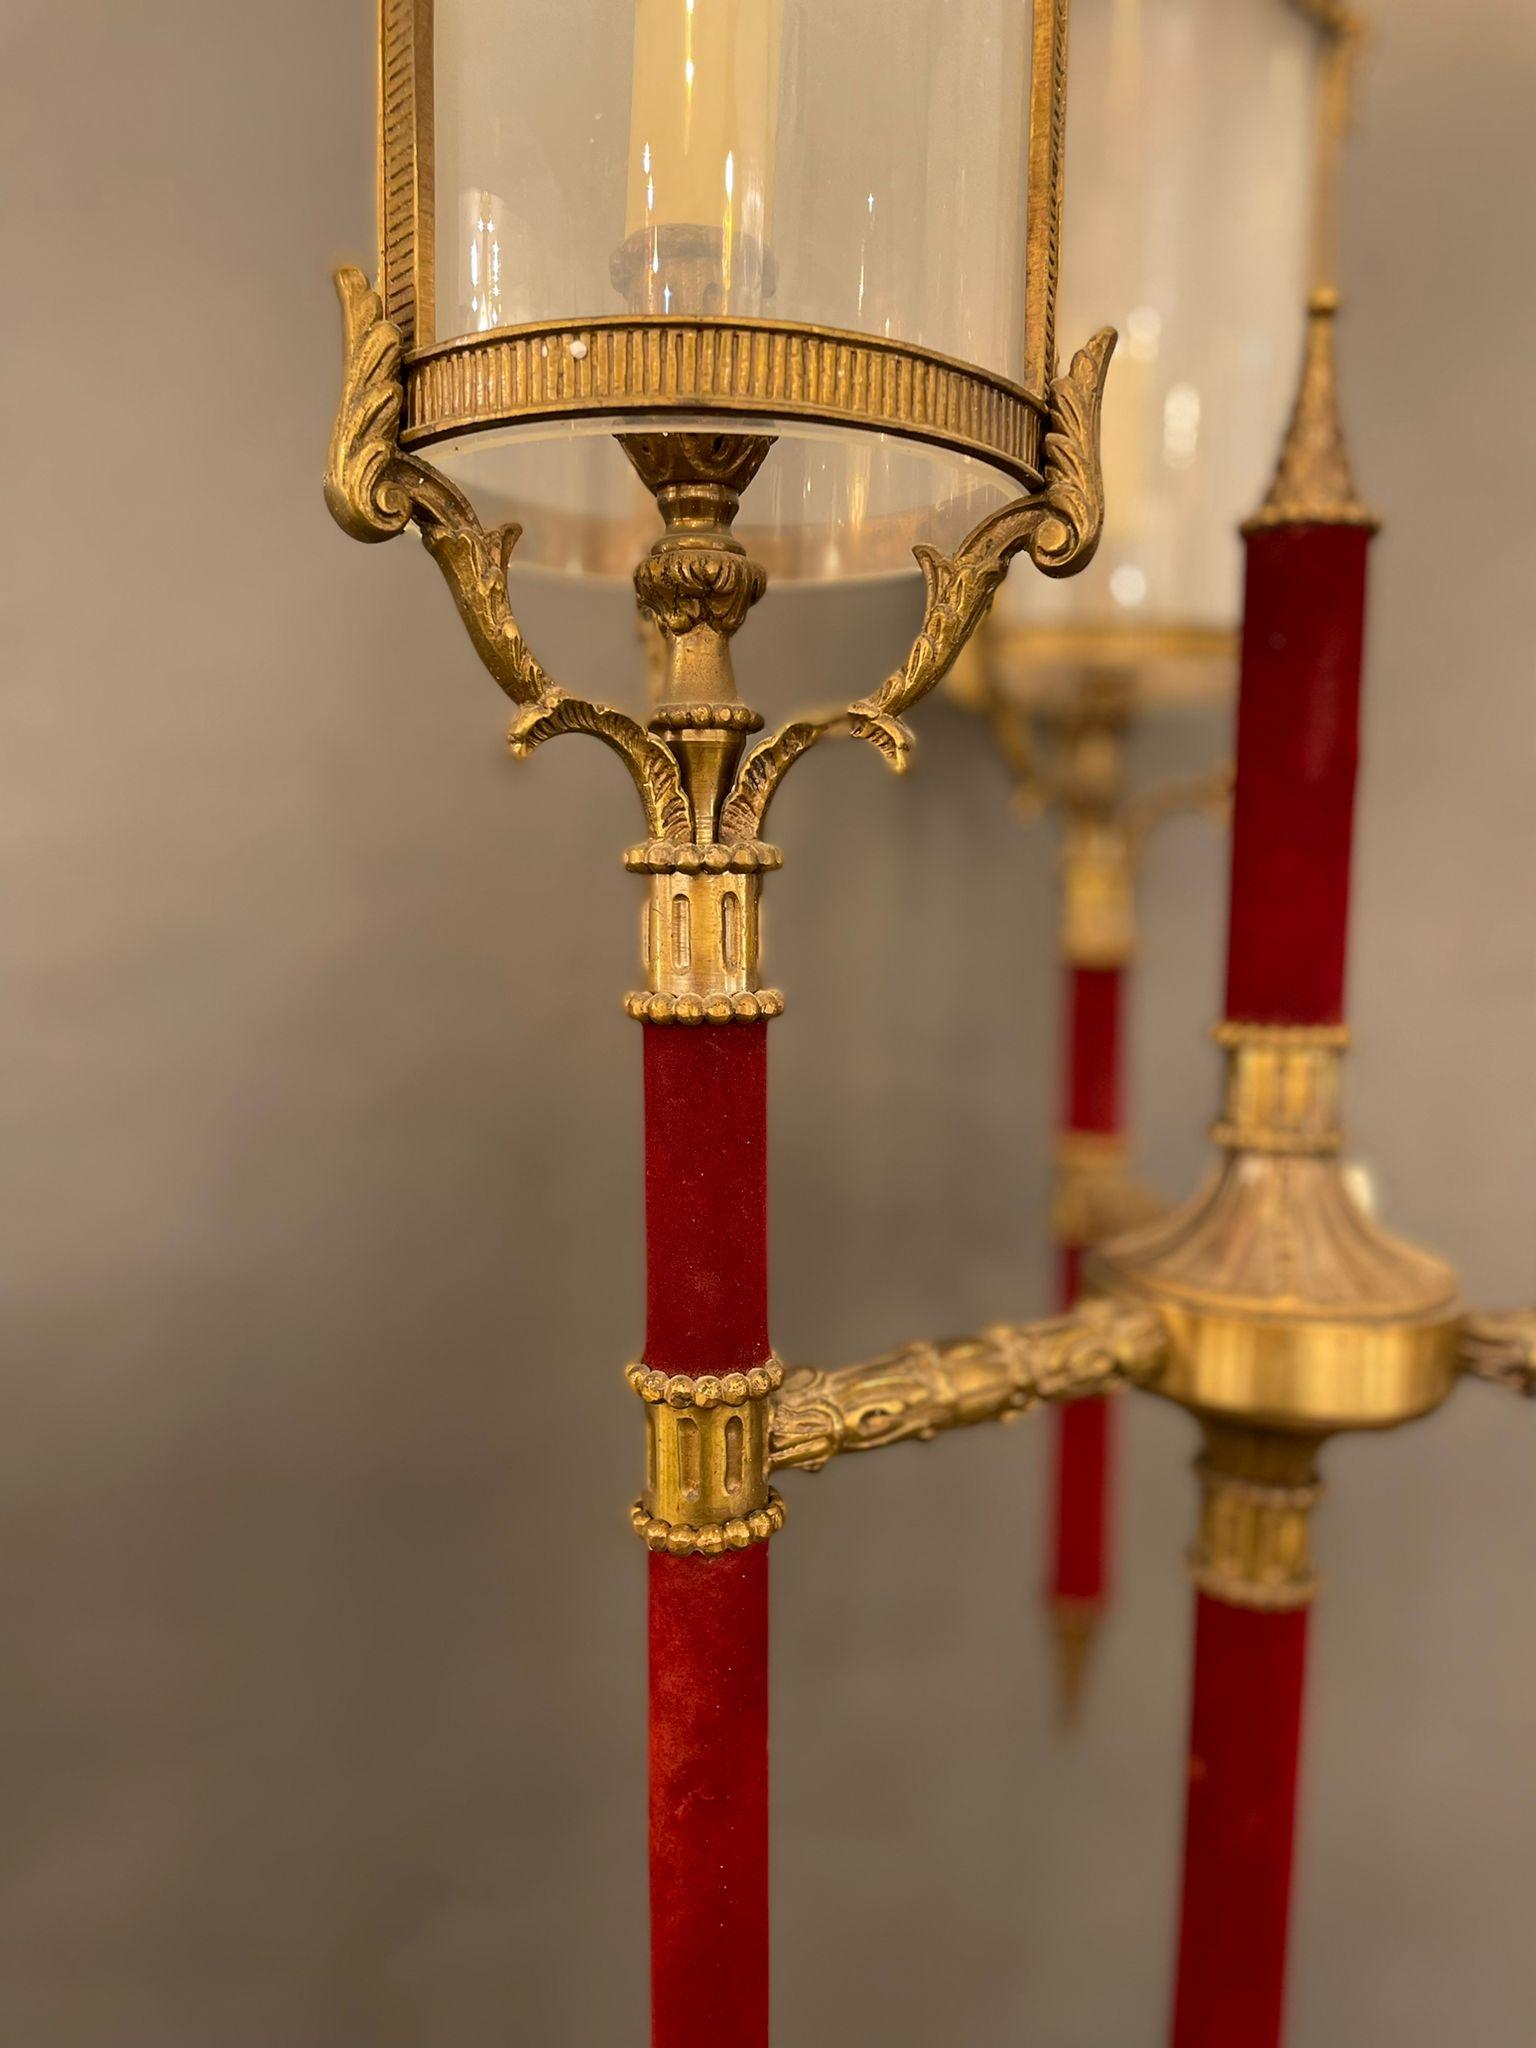 An original floor lamp in bronze adorned with bronze decorations. The arms and the central pole are adorned with fine red velvet with opaline glass shades. The floor lamp has a solid base in bronze with decorations. Italy 1930s